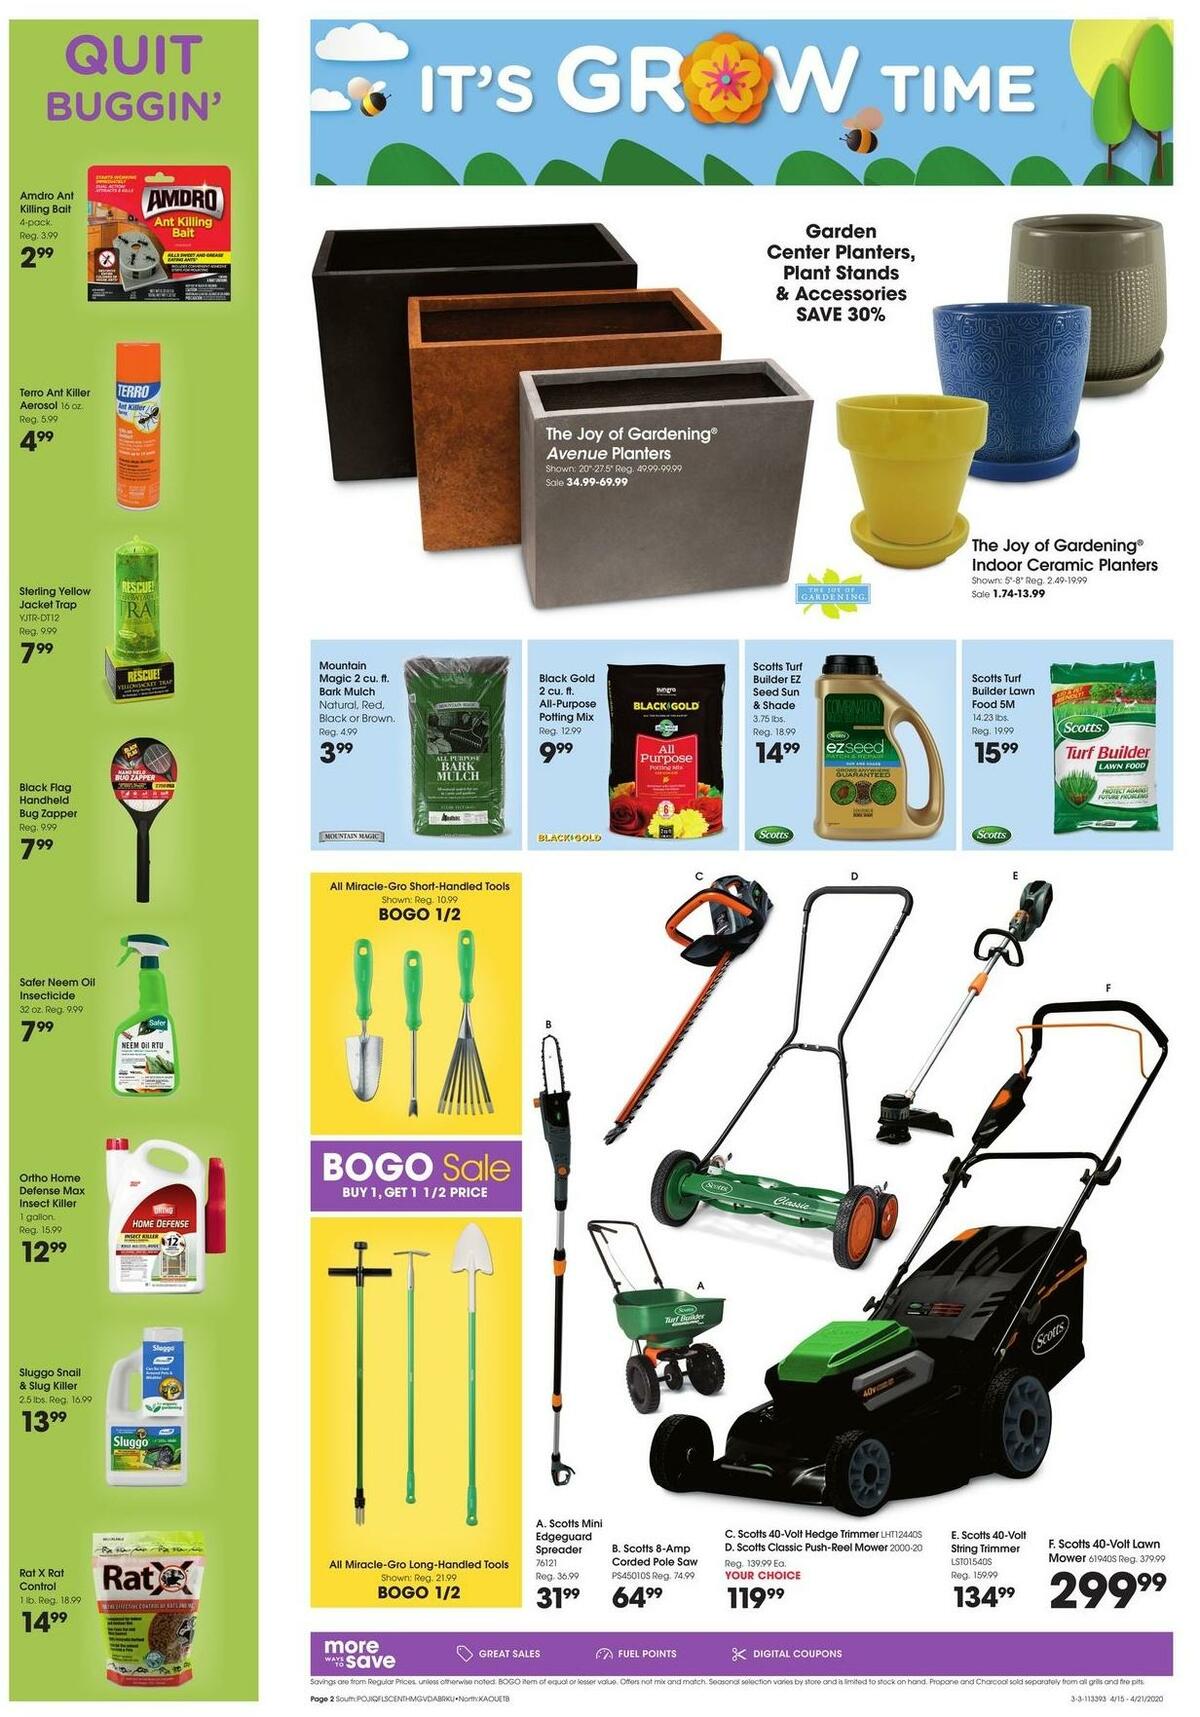 Fred Meyer Garden Weekly Ad from April 15